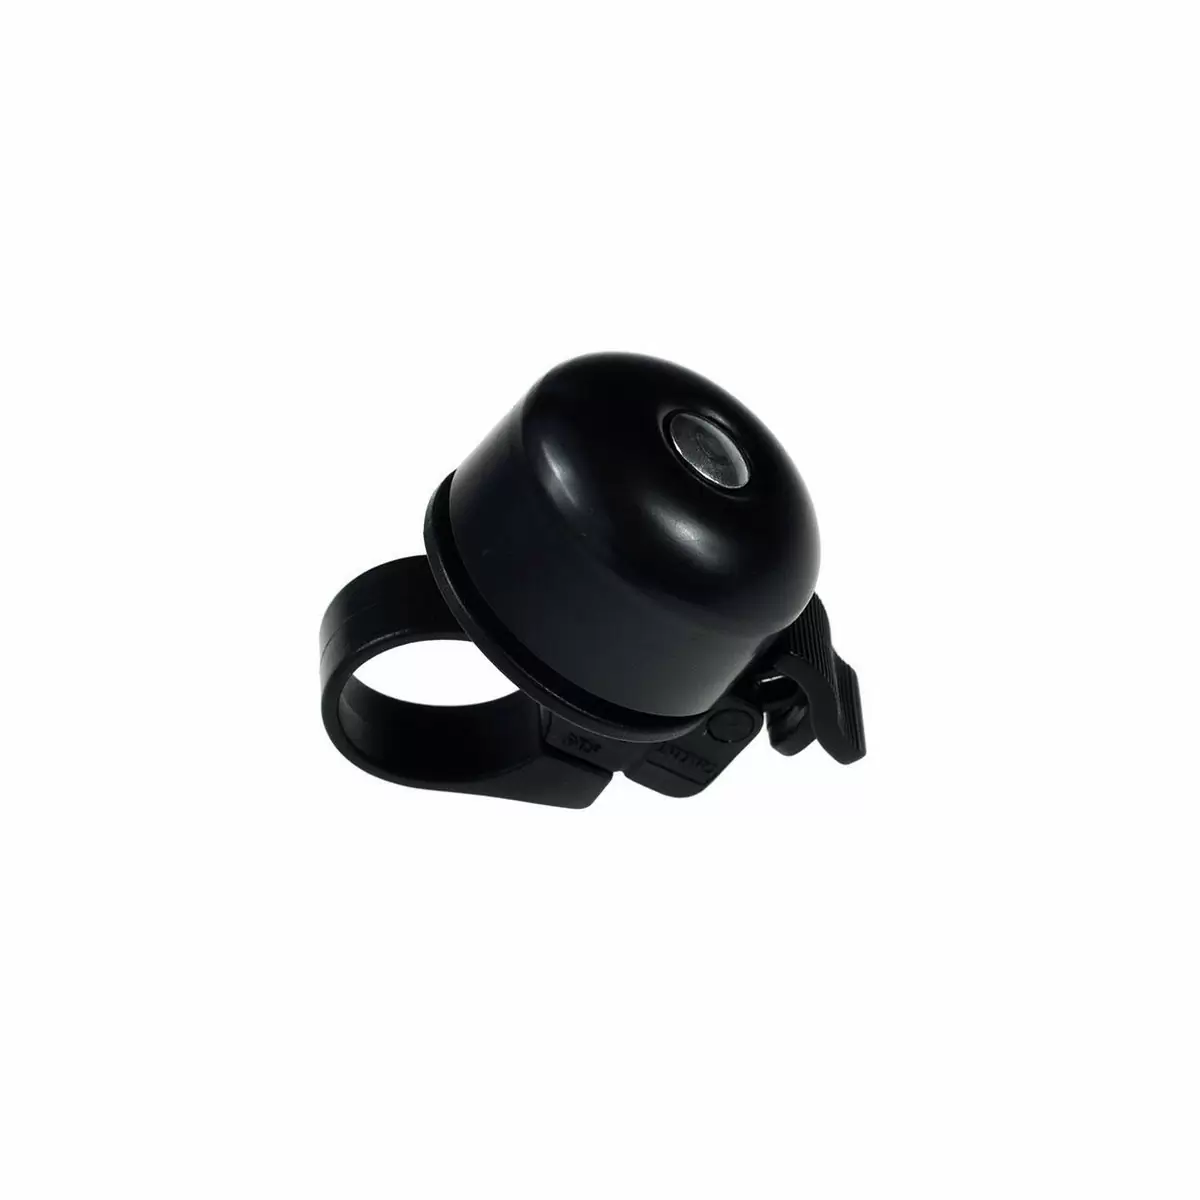 Small ping bell black - image